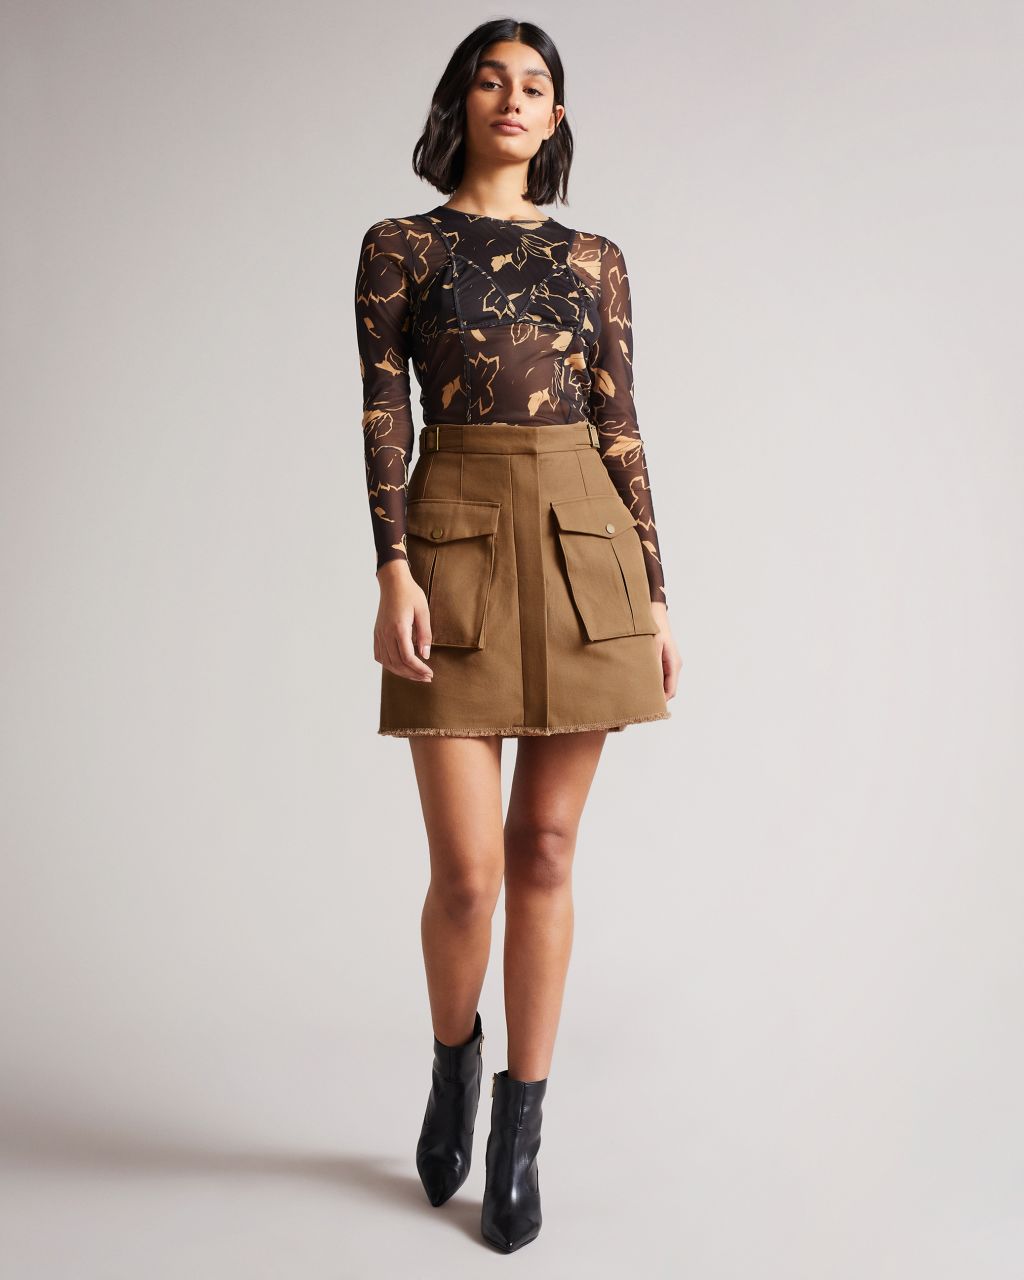 Ted Baker Women's Utility Twill Mini Skirt in Brown, Laigha, Cotton